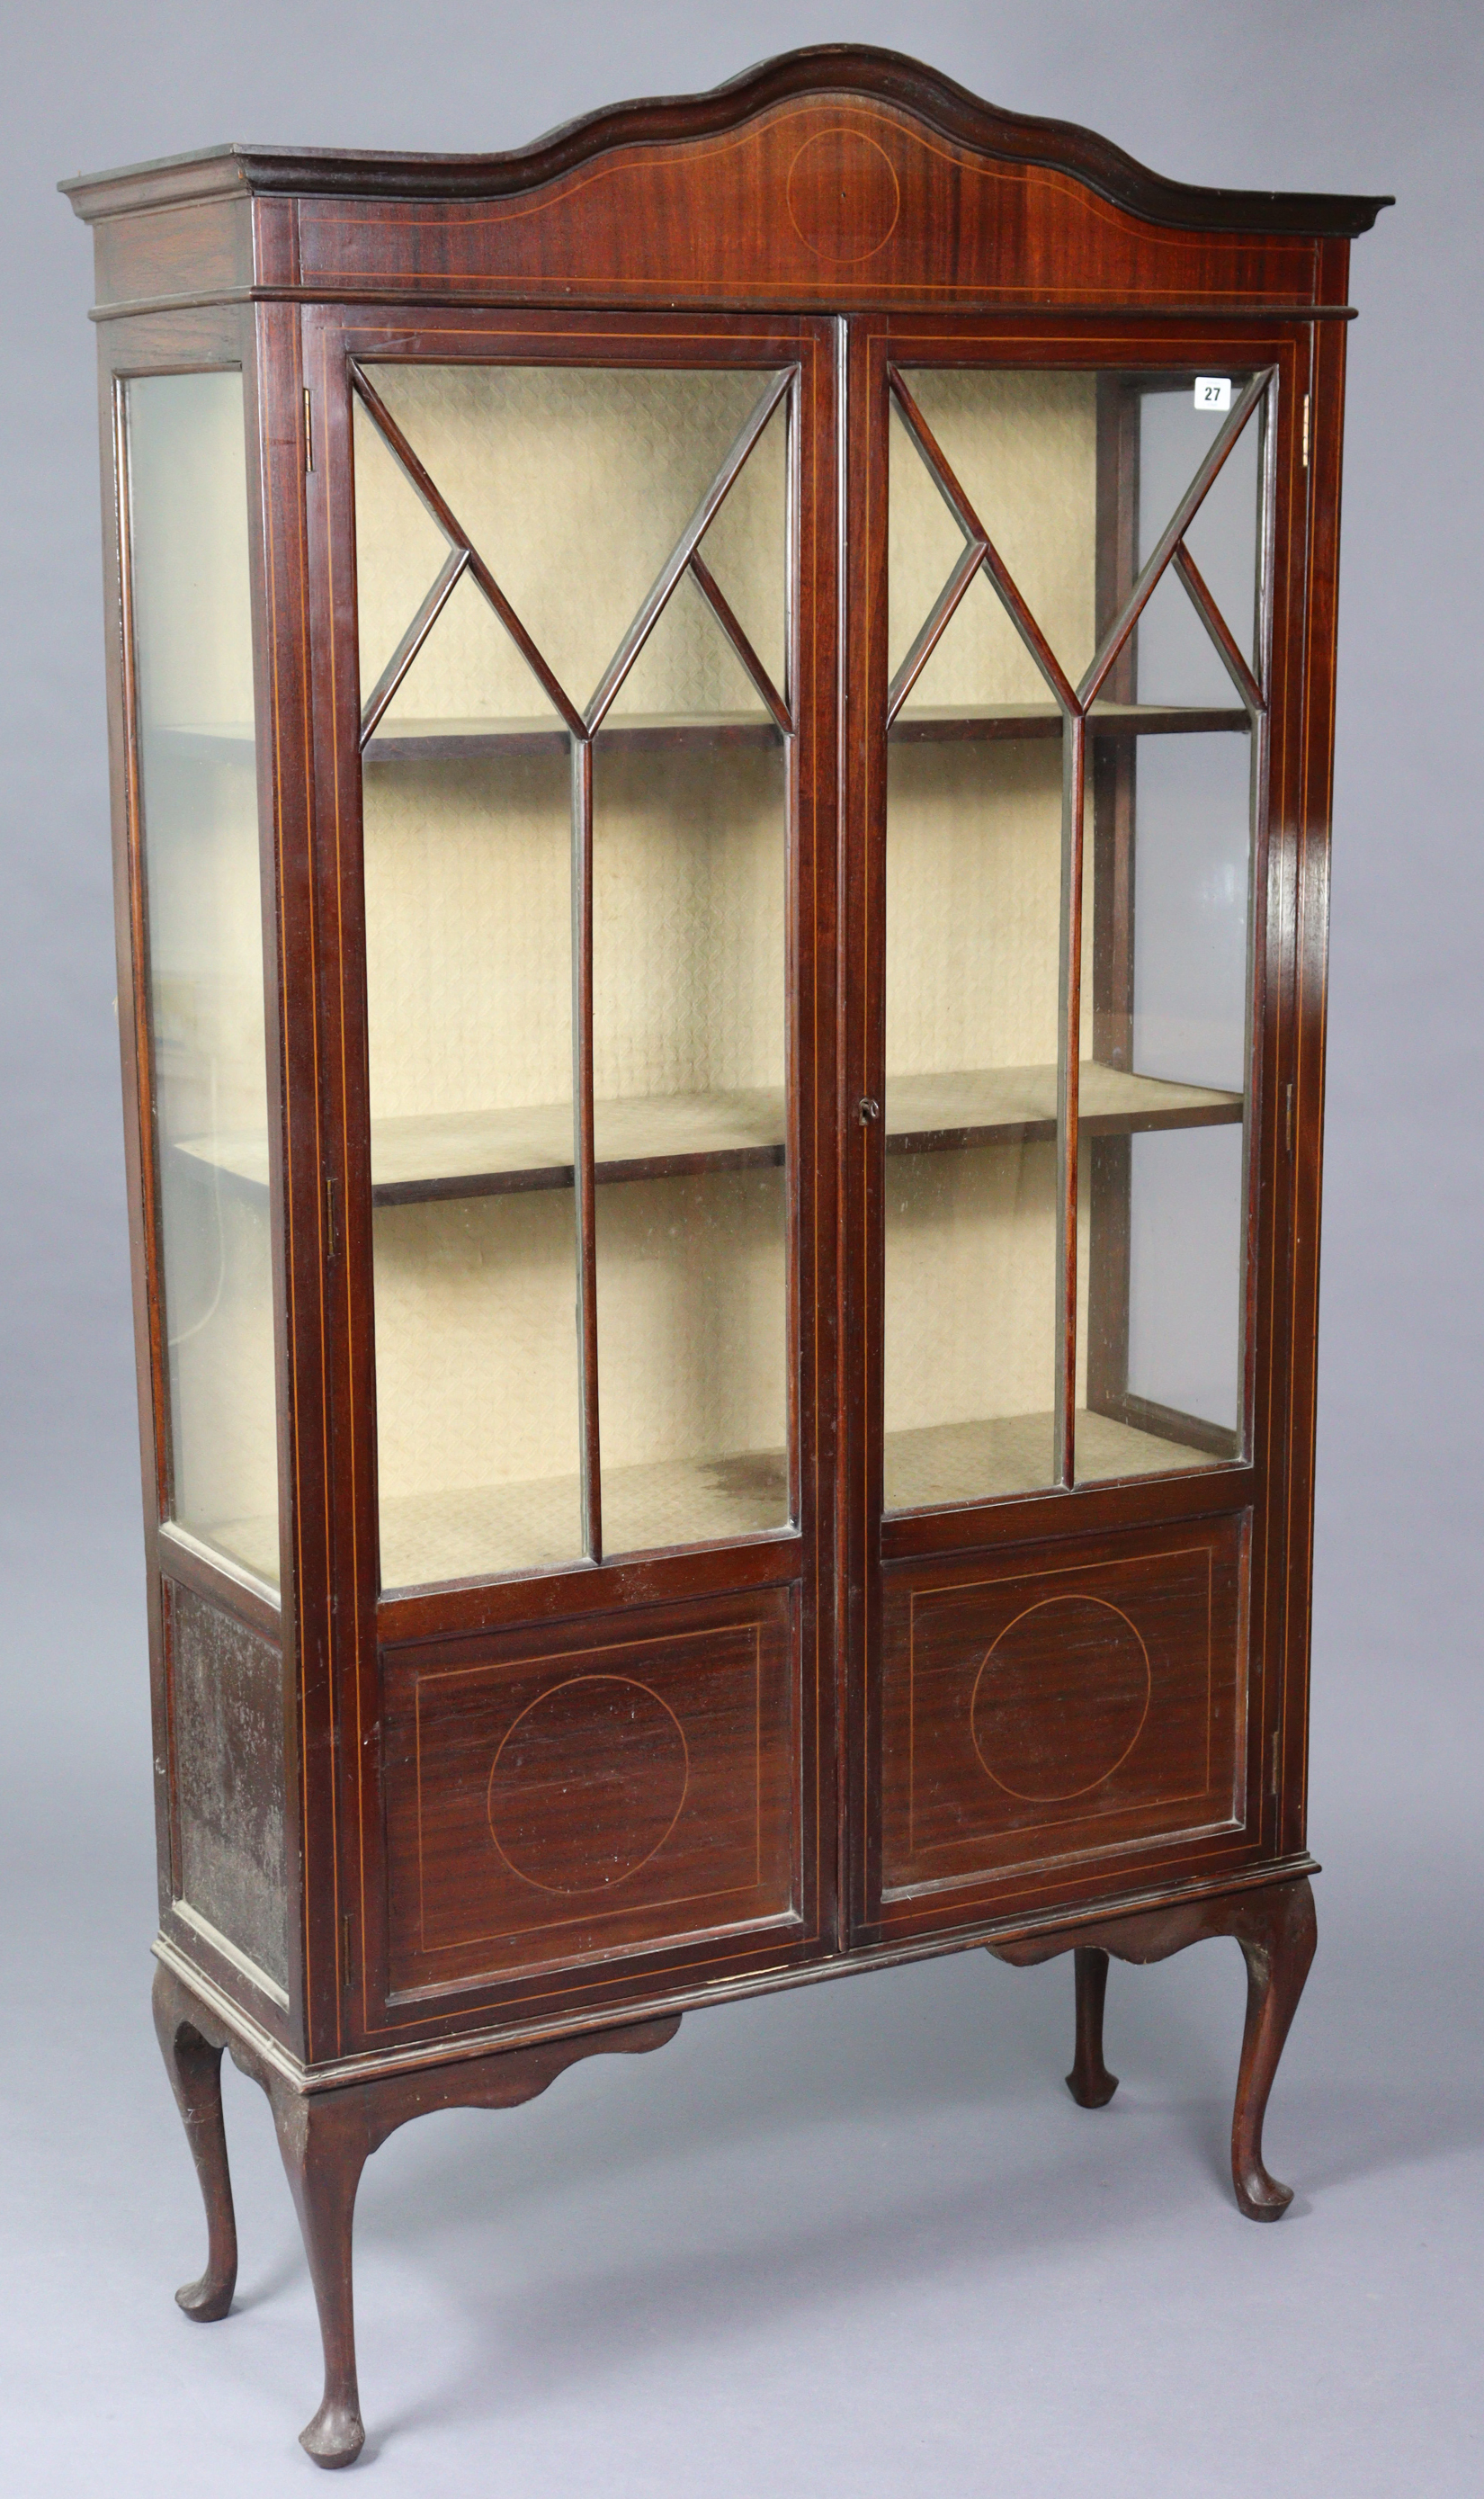 An Edwardian inlaid-mahogany tall china display cabinet fitted three shelves enclosed by a pair of